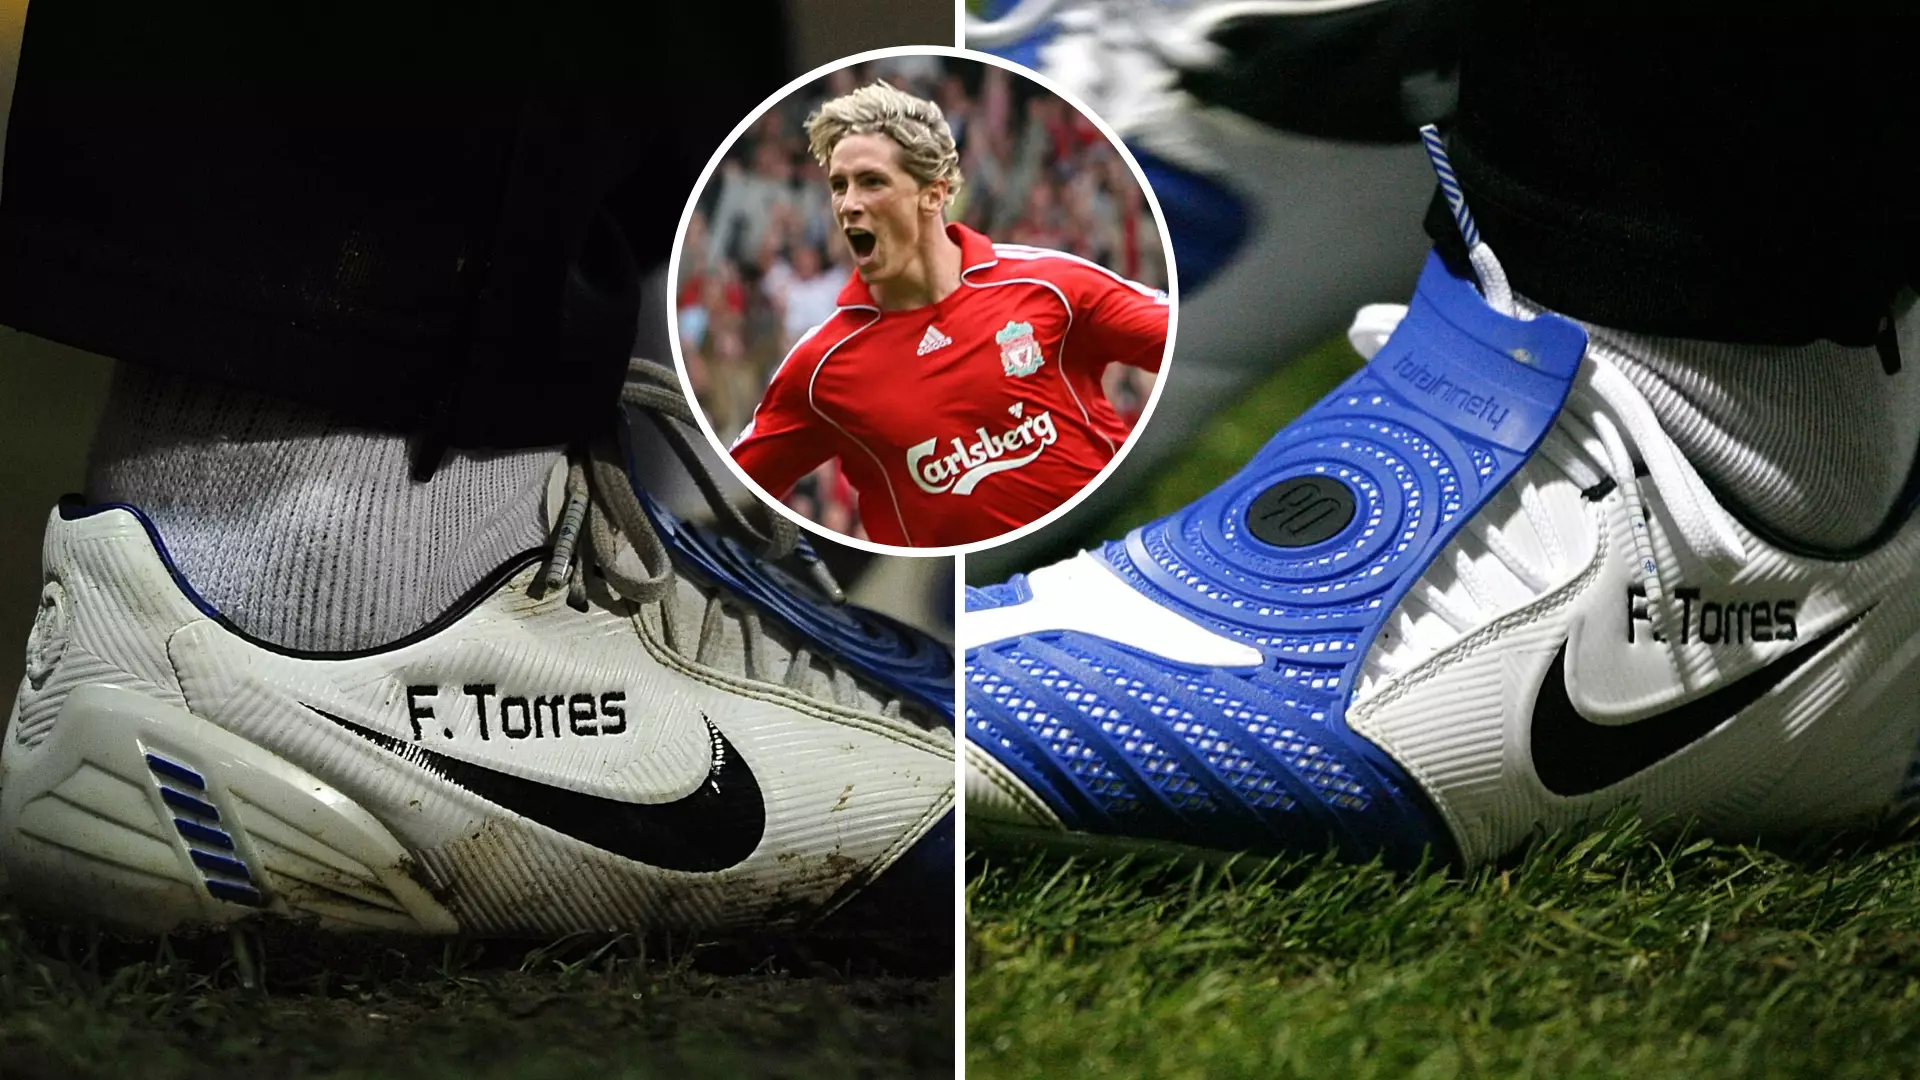 Liverpool legend Fernando Torres also knew the score when it came to stylish footwear.